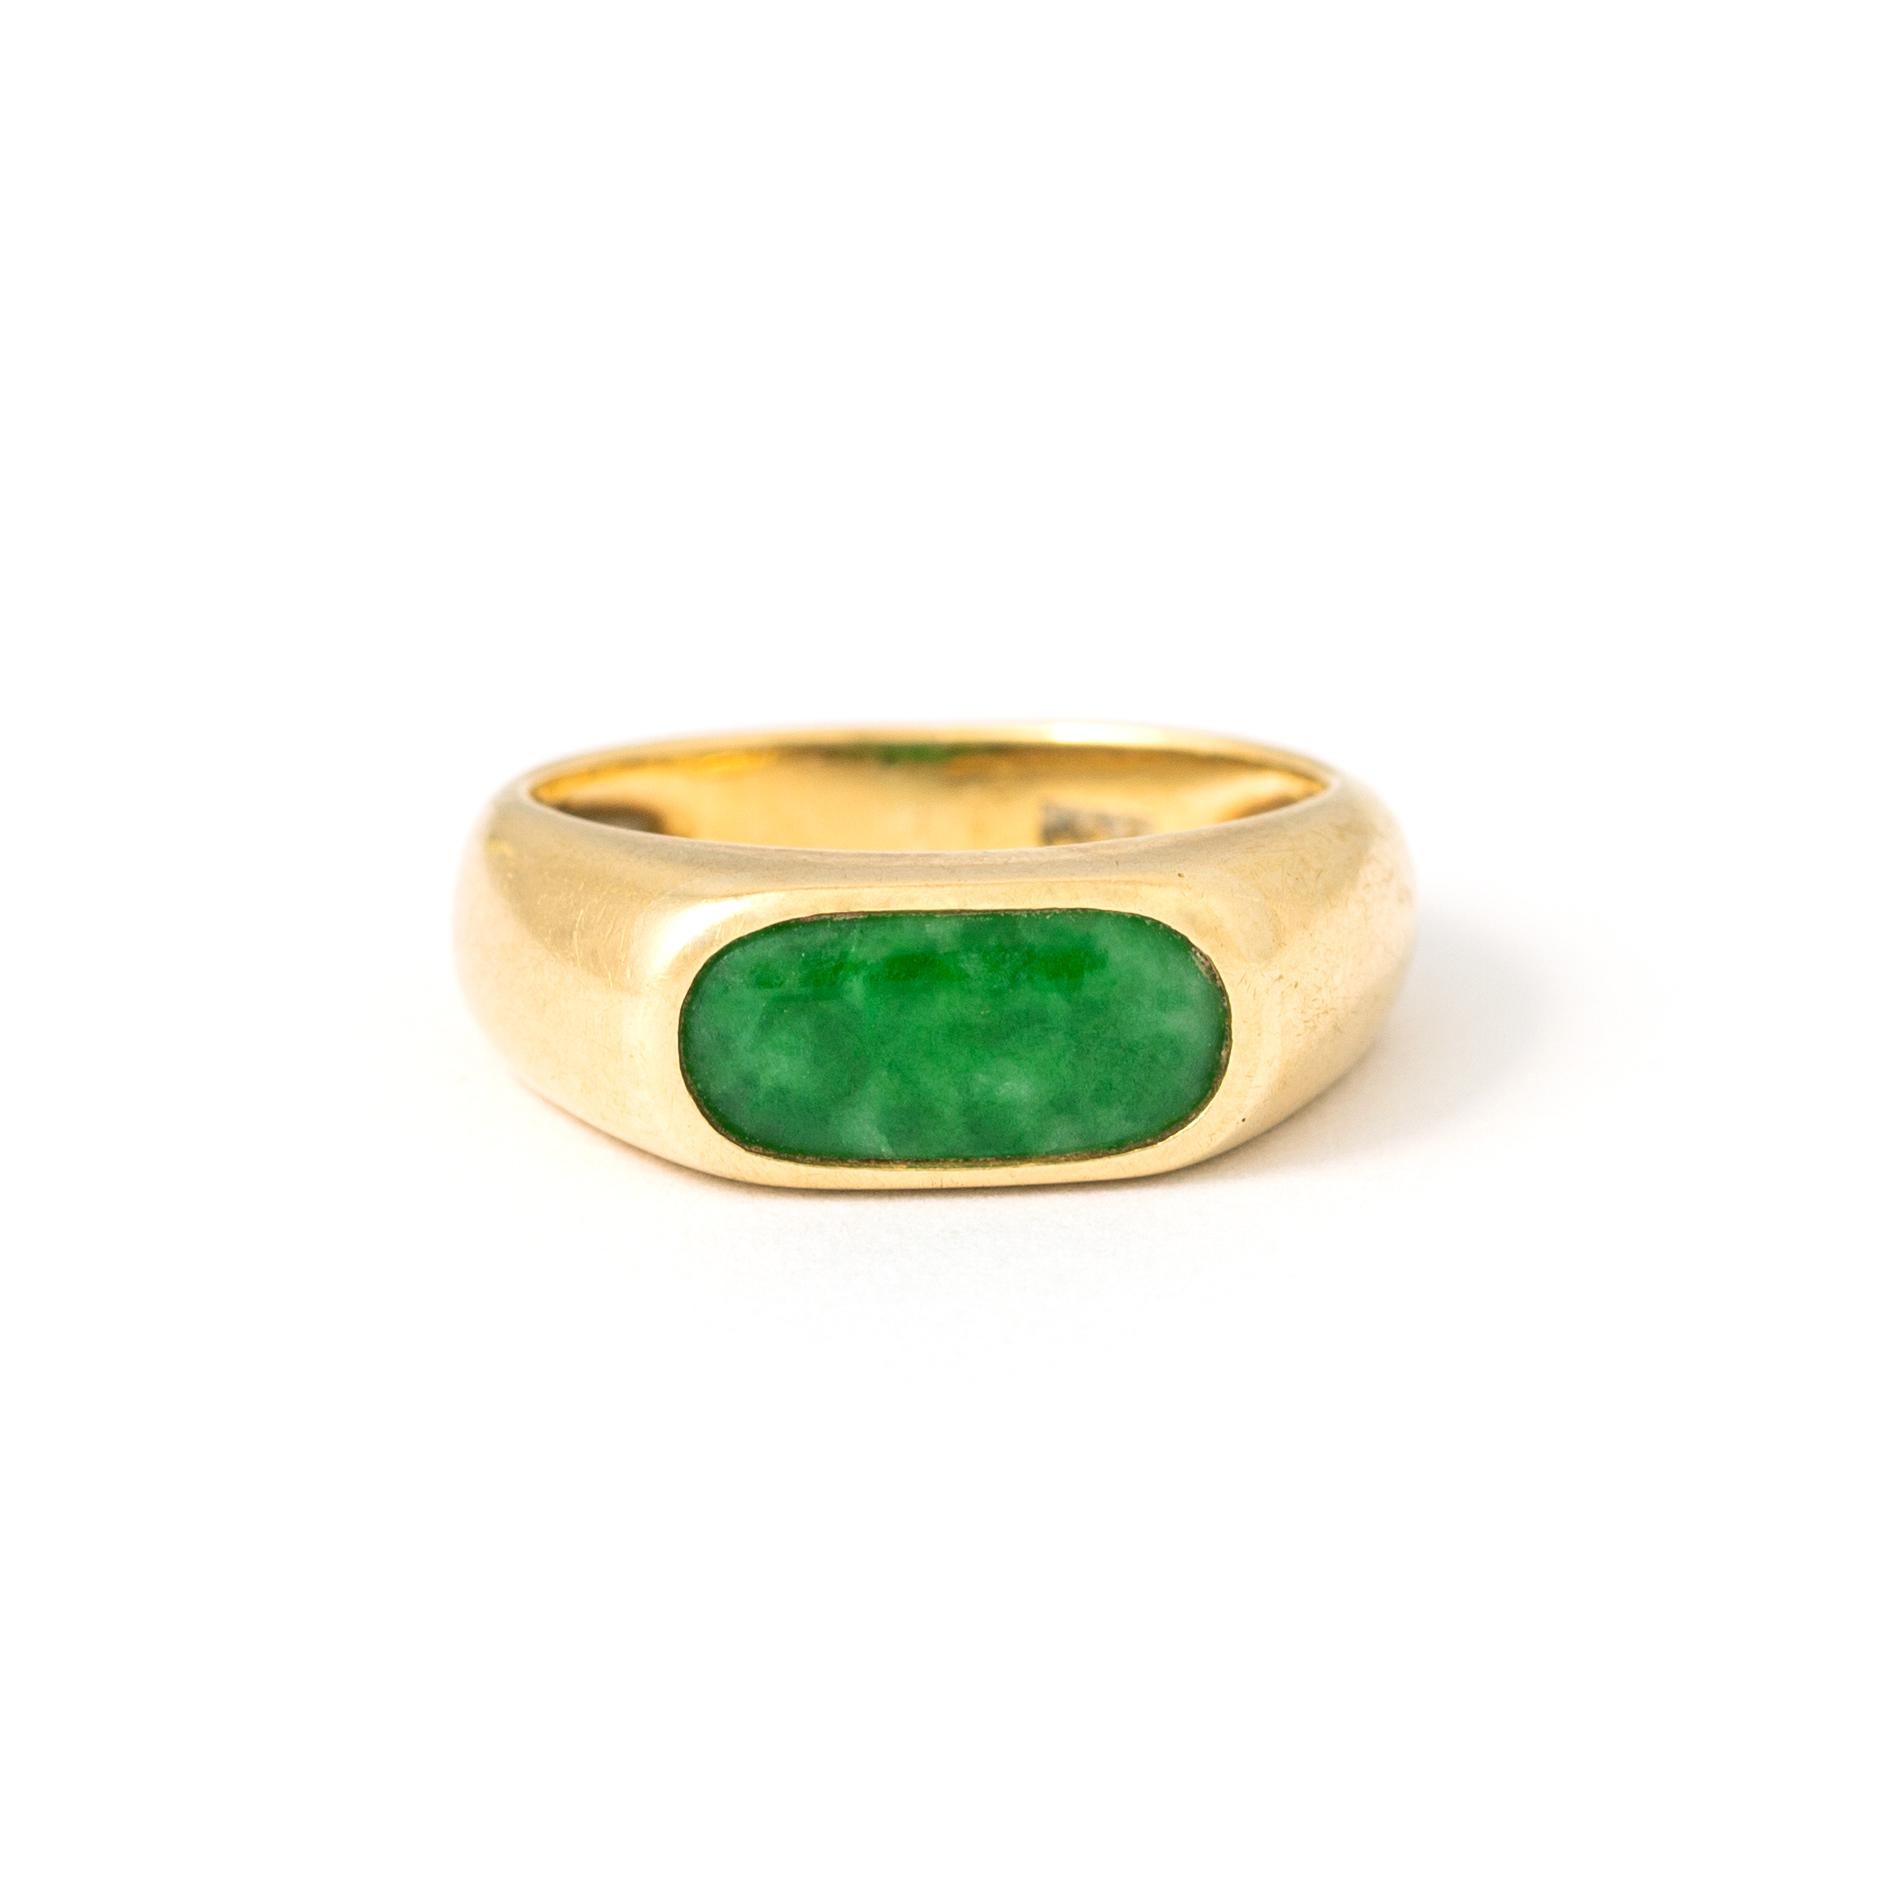 18K yellow gold ring centered by a green hard stone. 
Size: 42. 
Gross weight: 4.14 grams.